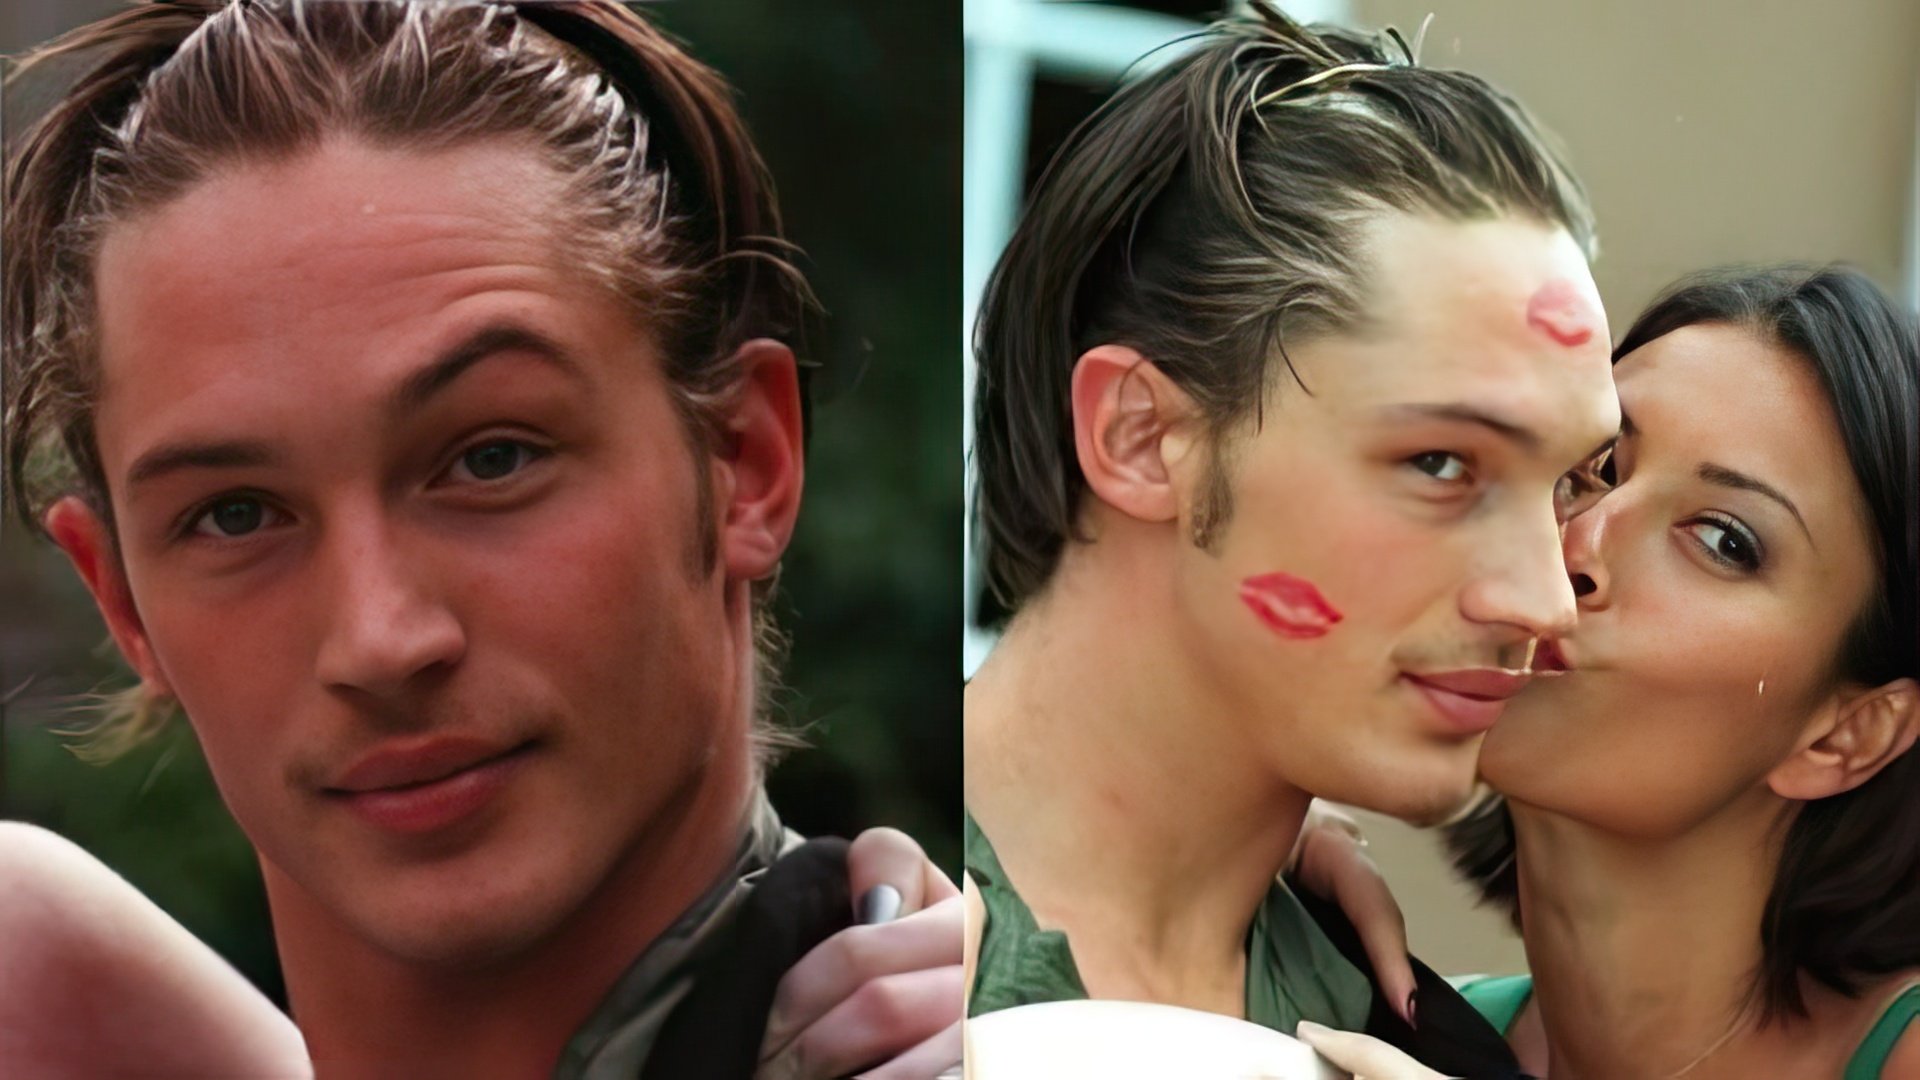 Tom Hardy before becoming famous